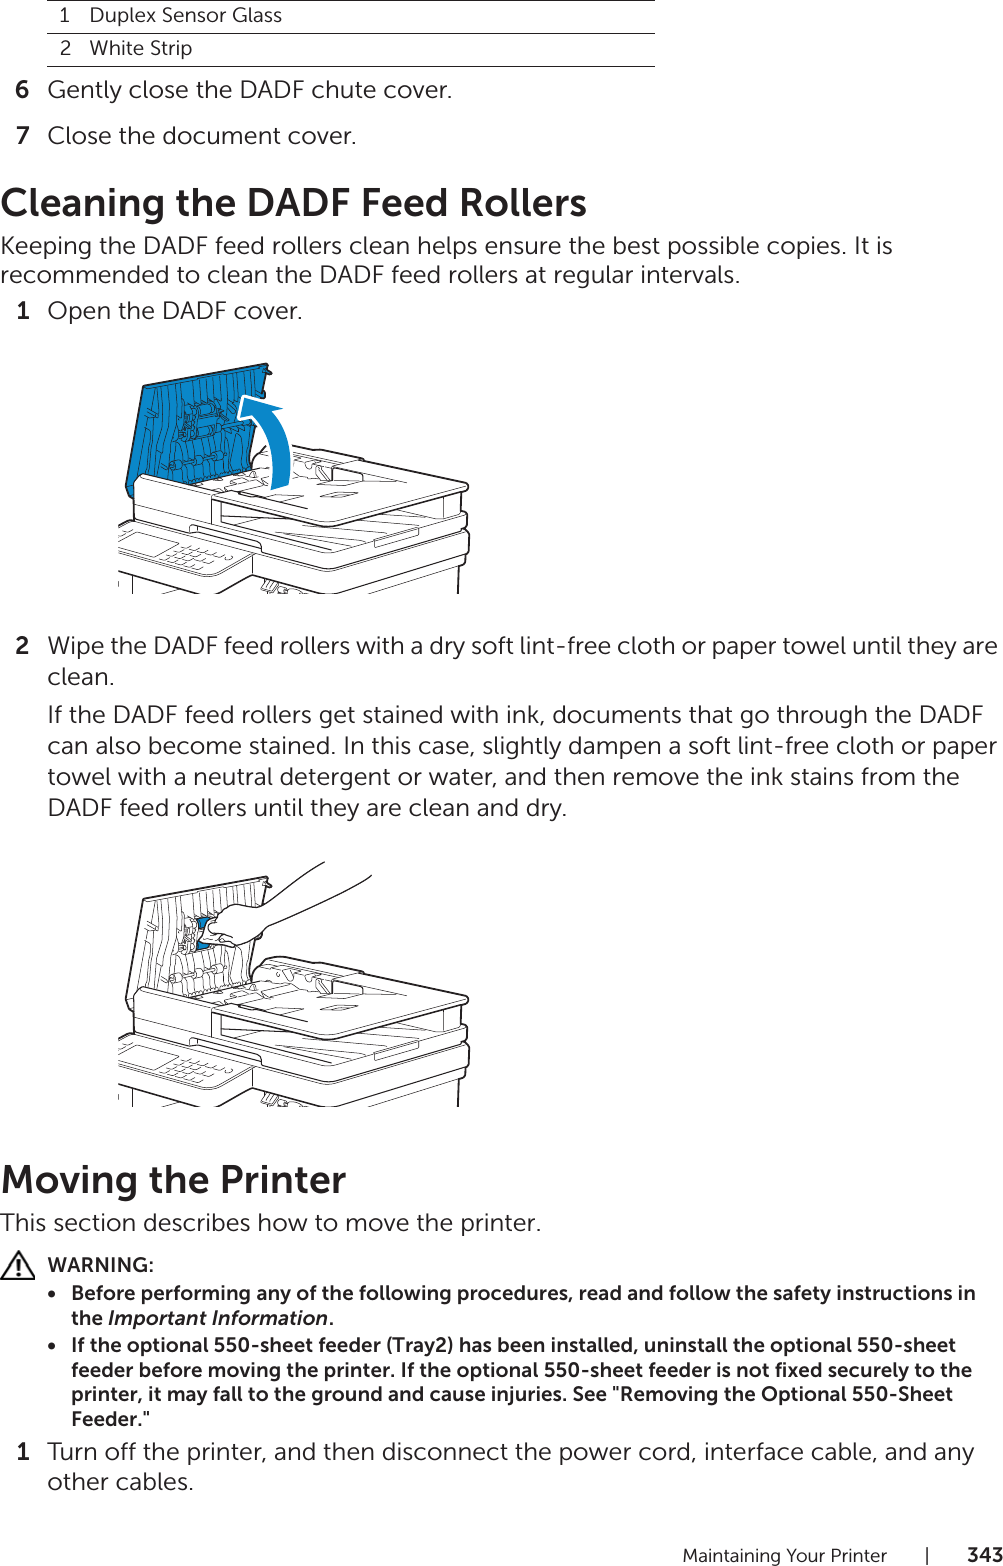 Maintaining Your Printer |3436Gently close the DADF chute cover.7Close the document cover.Cleaning the DADF Feed RollersKeeping the DADF feed rollers clean helps ensure the best possible copies. It is recommended to clean the DADF feed rollers at regular intervals.1Open the DADF cover.2Wipe the DADF feed rollers with a dry soft lint-free cloth or paper towel until they are clean.If the DADF feed rollers get stained with ink, documents that go through the DADF can also become stained. In this case, slightly dampen a soft lint-free cloth or paper towel with a neutral detergent or water, and then remove the ink stains from the DADF feed rollers until they are clean and dry.Moving the PrinterThis section describes how to move the printer.WARNING:• Before performing any of the following procedures, read and follow the safety instructions in the Important Information.• If the optional 550-sheet feeder (Tray2) has been installed, uninstall the optional 550-sheet feeder before moving the printer. If the optional 550-sheet feeder is not fixed securely to the printer, it may fall to the ground and cause injuries. See &quot;Removing the Optional 550-Sheet Feeder.&quot;1Turn off the printer, and then disconnect the power cord, interface cable, and any other cables.1Duplex Sensor Glass2White Strip